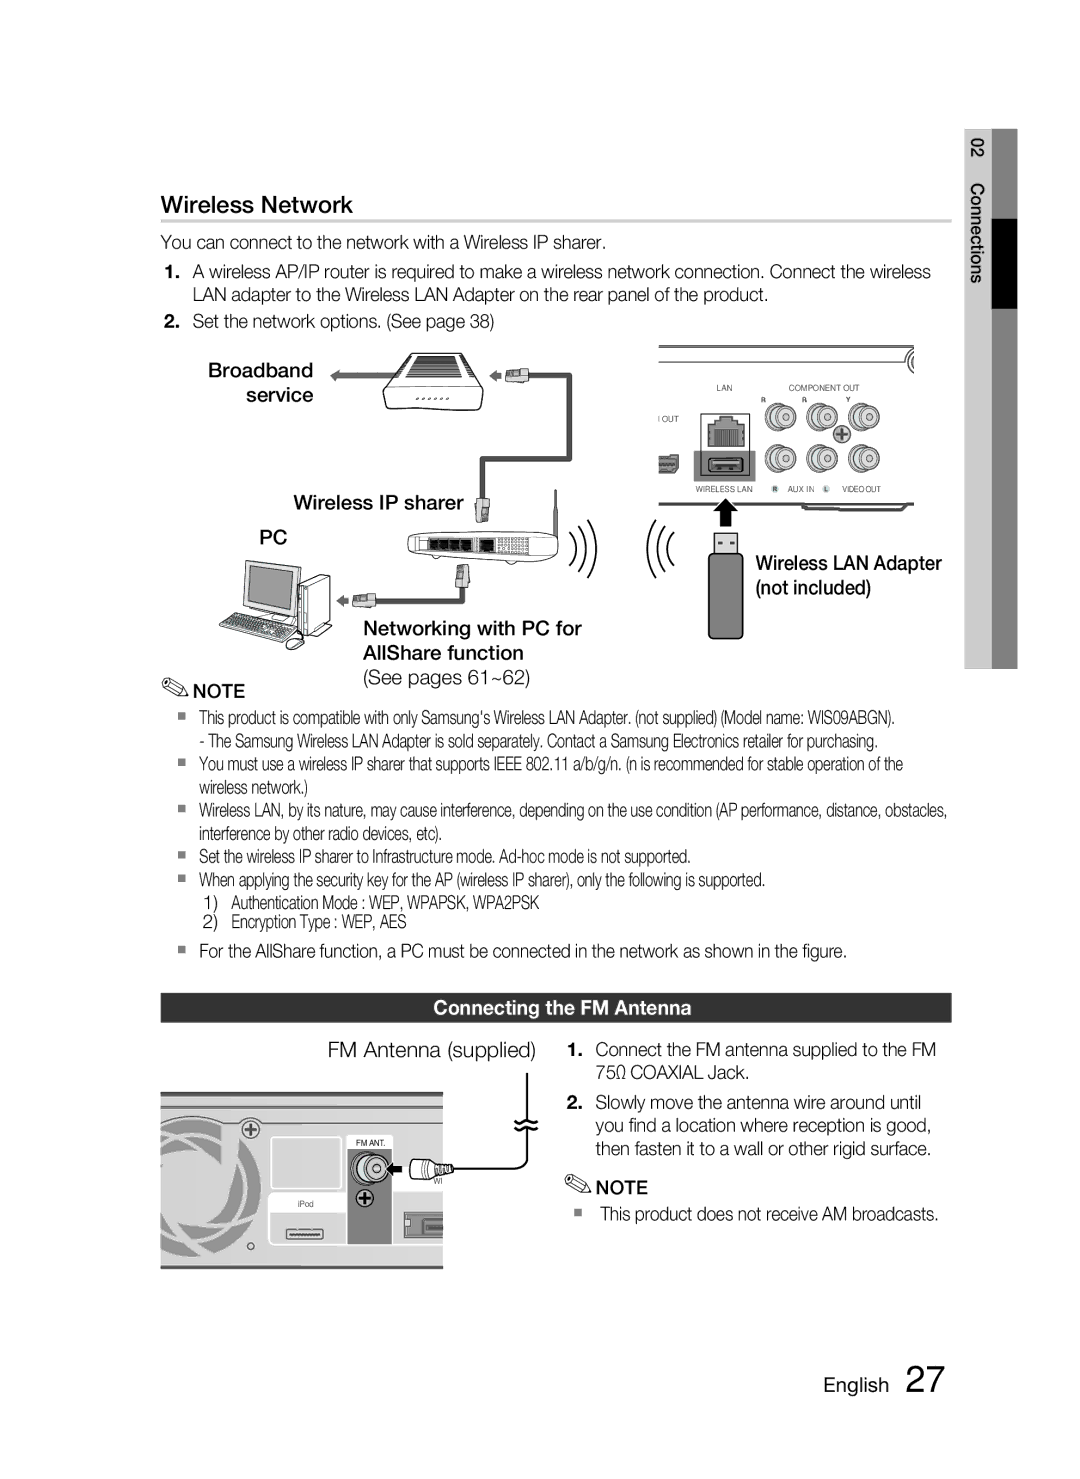 Samsung HT-C5550 user manual Connecting the FM Antenna, Wireless LAN Adapter not included 